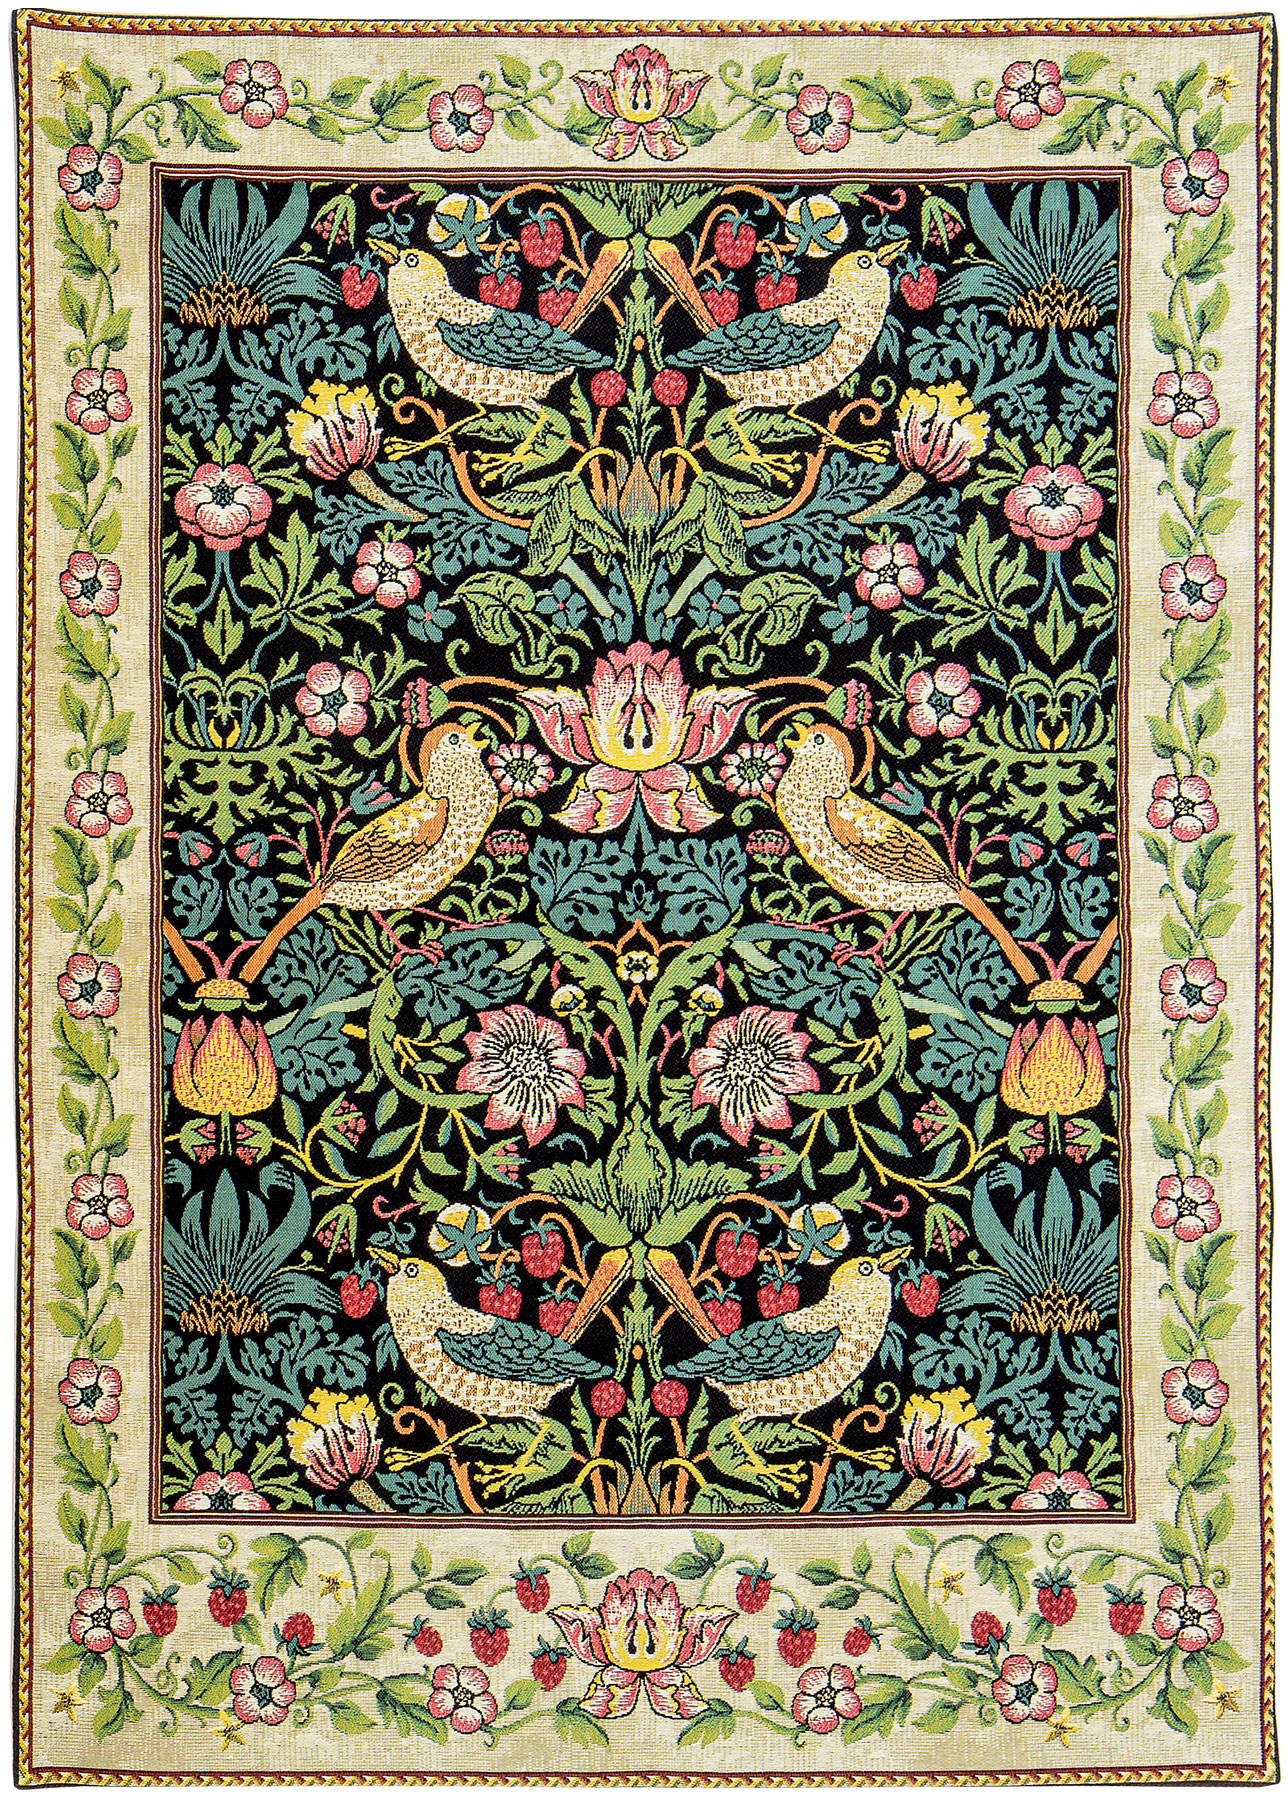 Tapestry "Strawberry Thief" - after William Morris